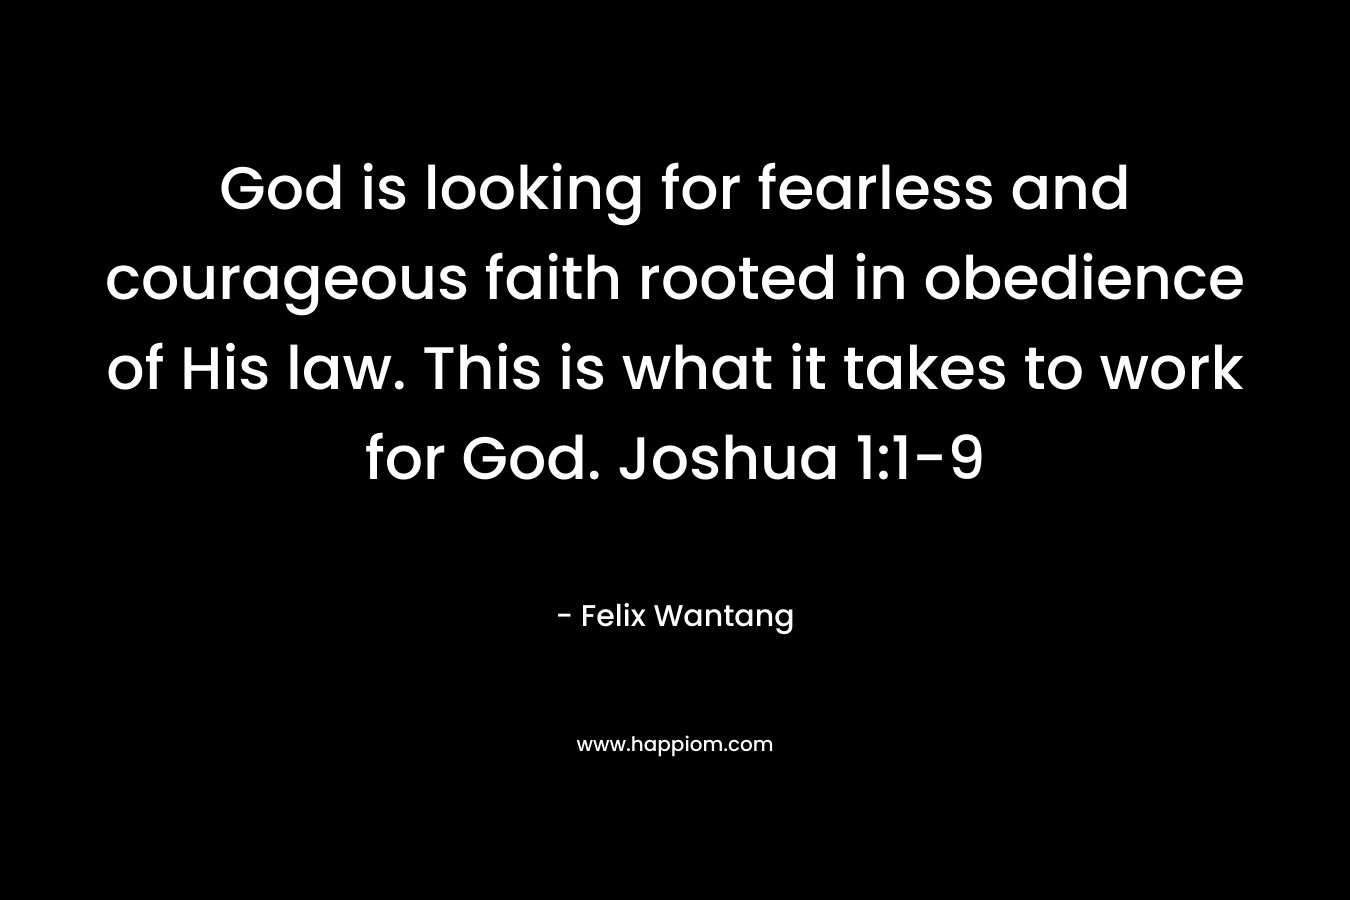 God is looking for fearless and courageous faith rooted in obedience of His law. This is what it takes to work for God. Joshua 1:1-9 – Felix Wantang